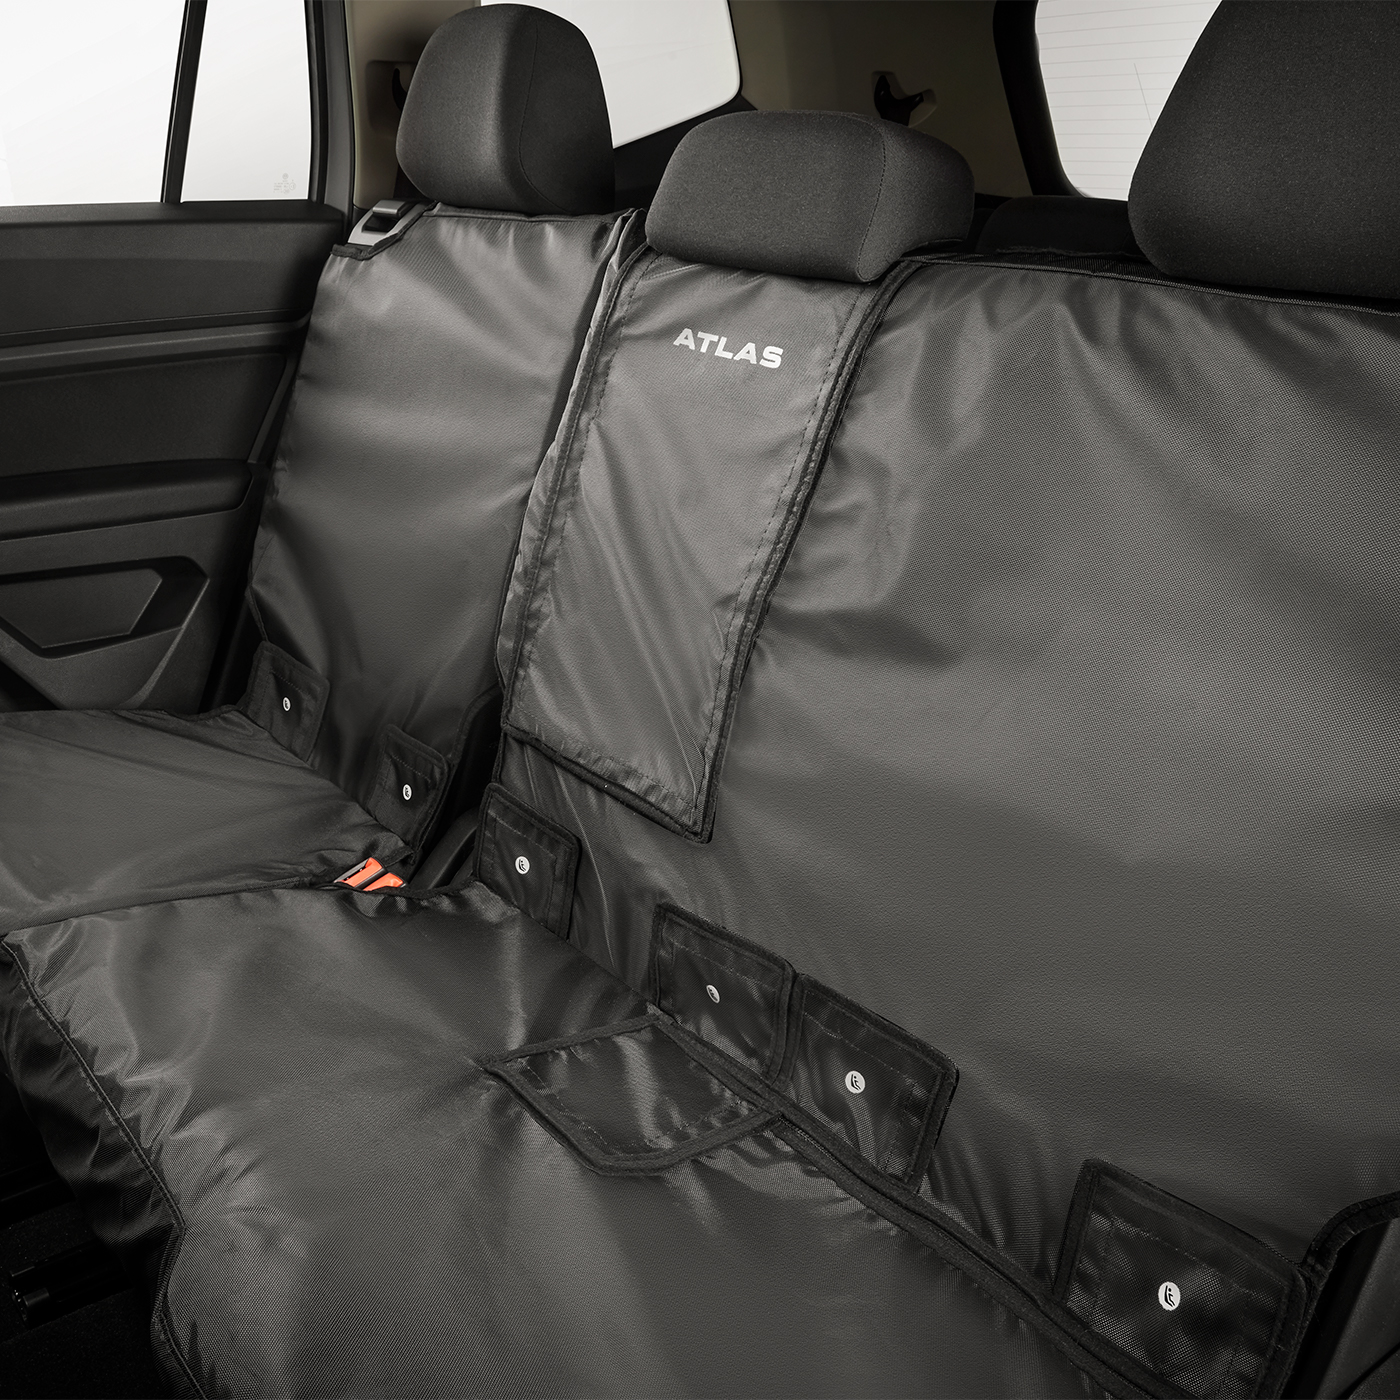 Volkswagen Rear Seat Cover with Atlas Logo | VW Service and Parts